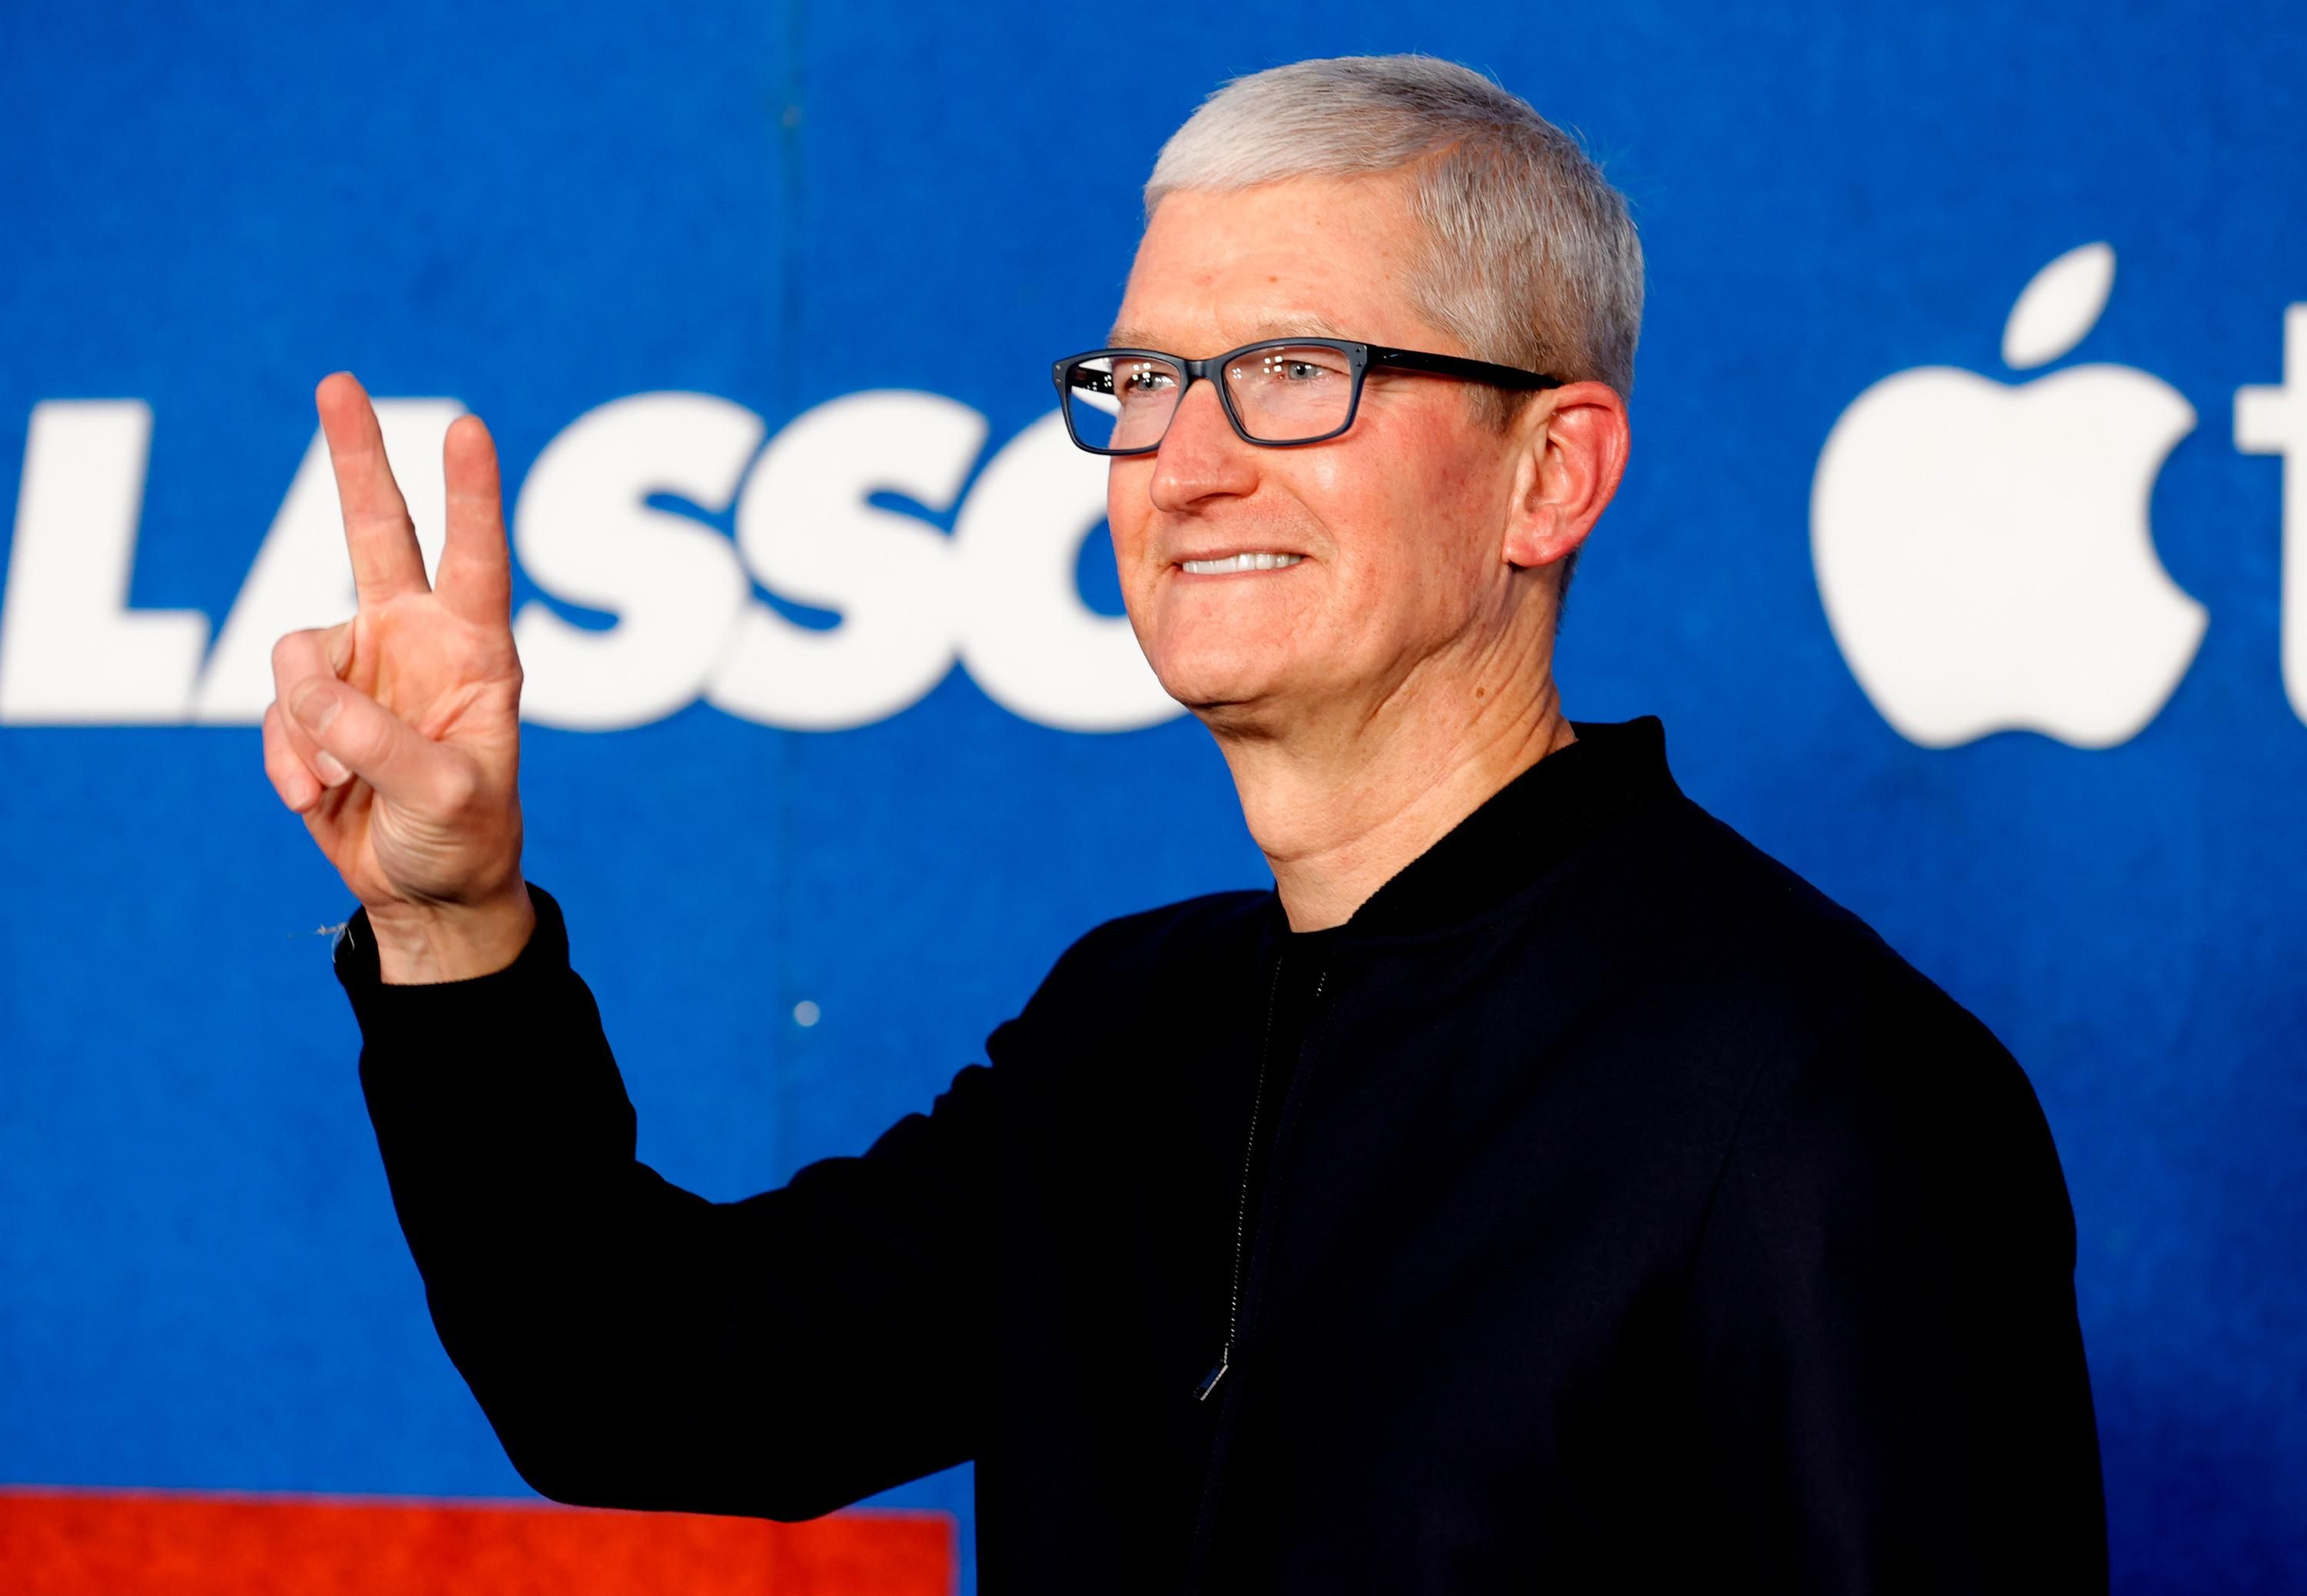 Apple CEO Tim Cook attends an event